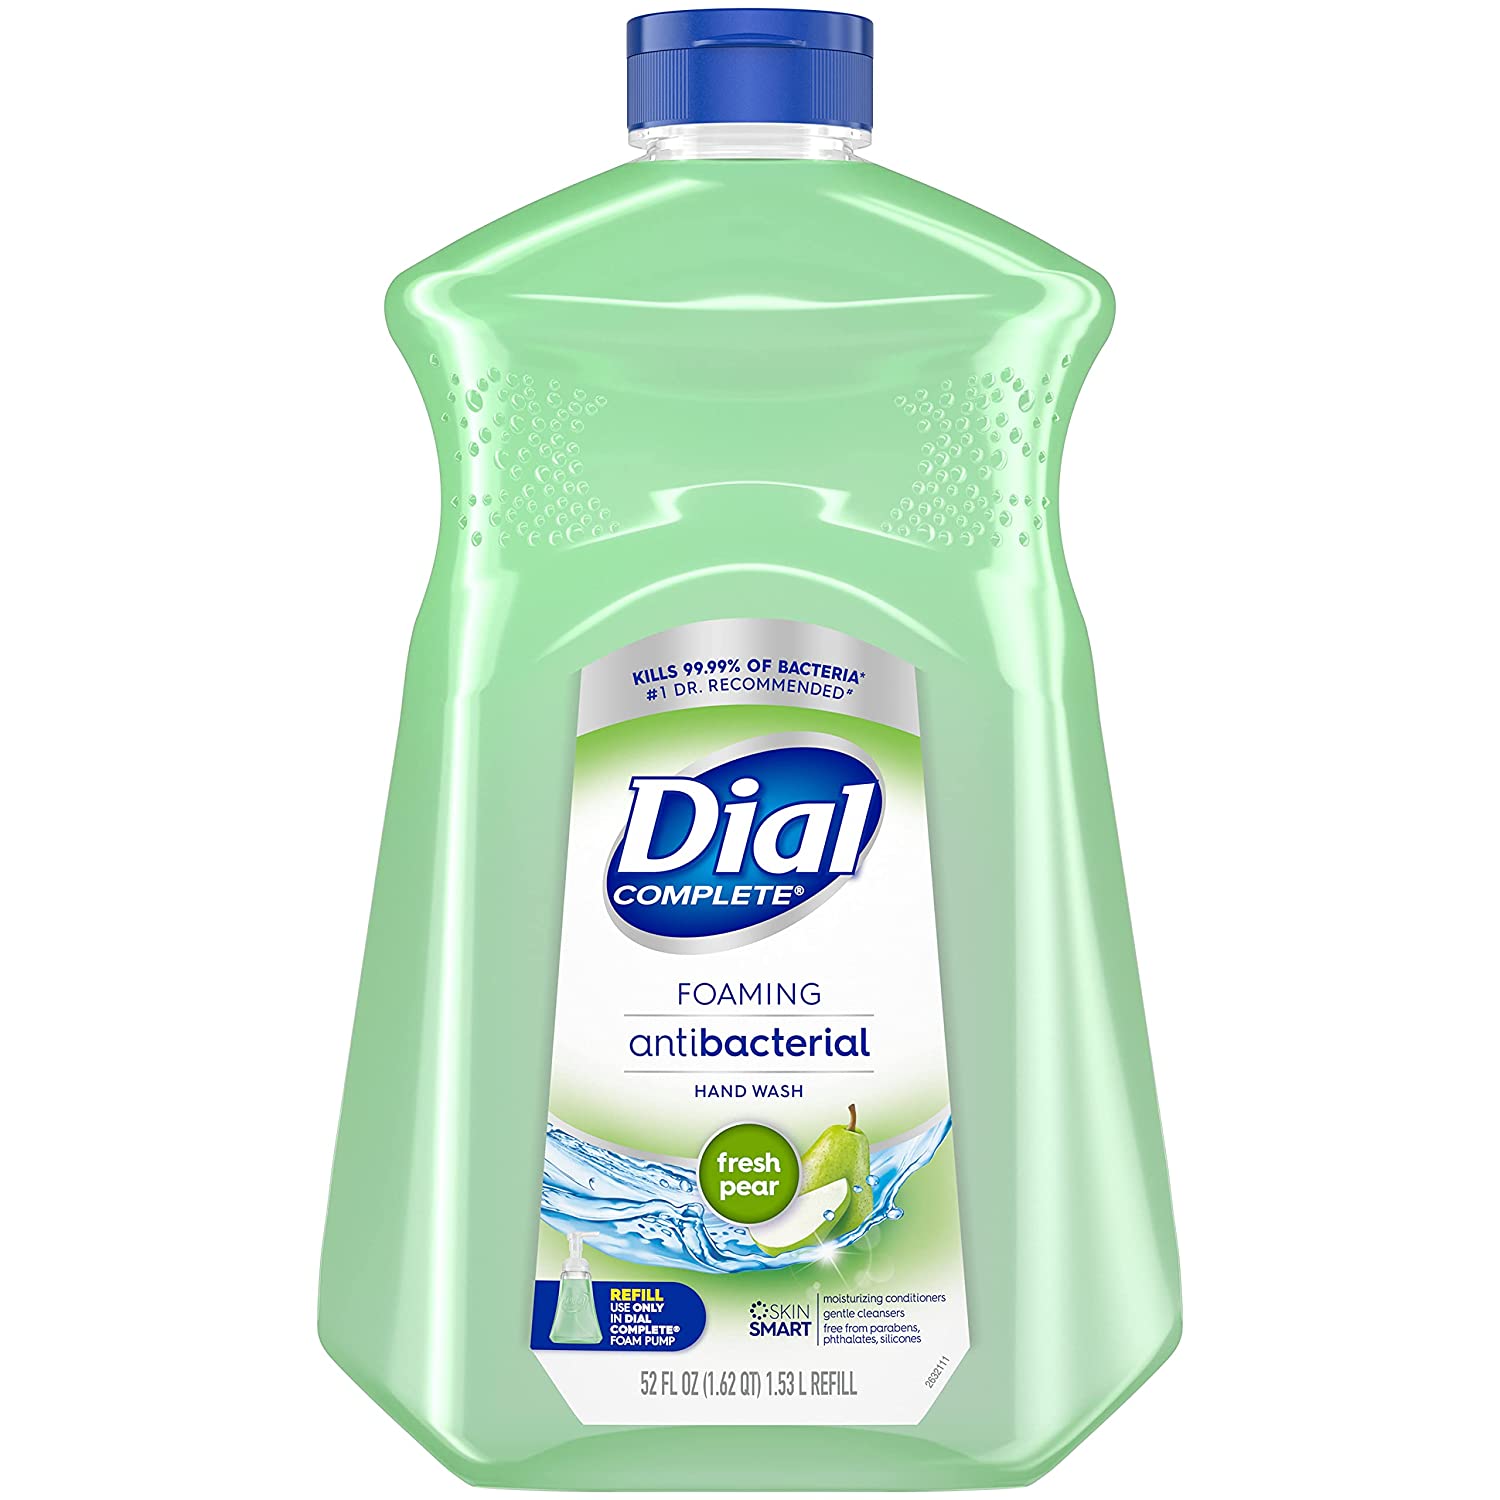 52-Oz Dial Complete Antibacterial Foaming Hand Soap (Fresh Pear) $4.90 w/ S&S + Free Shipping w/ Prime or on $25+